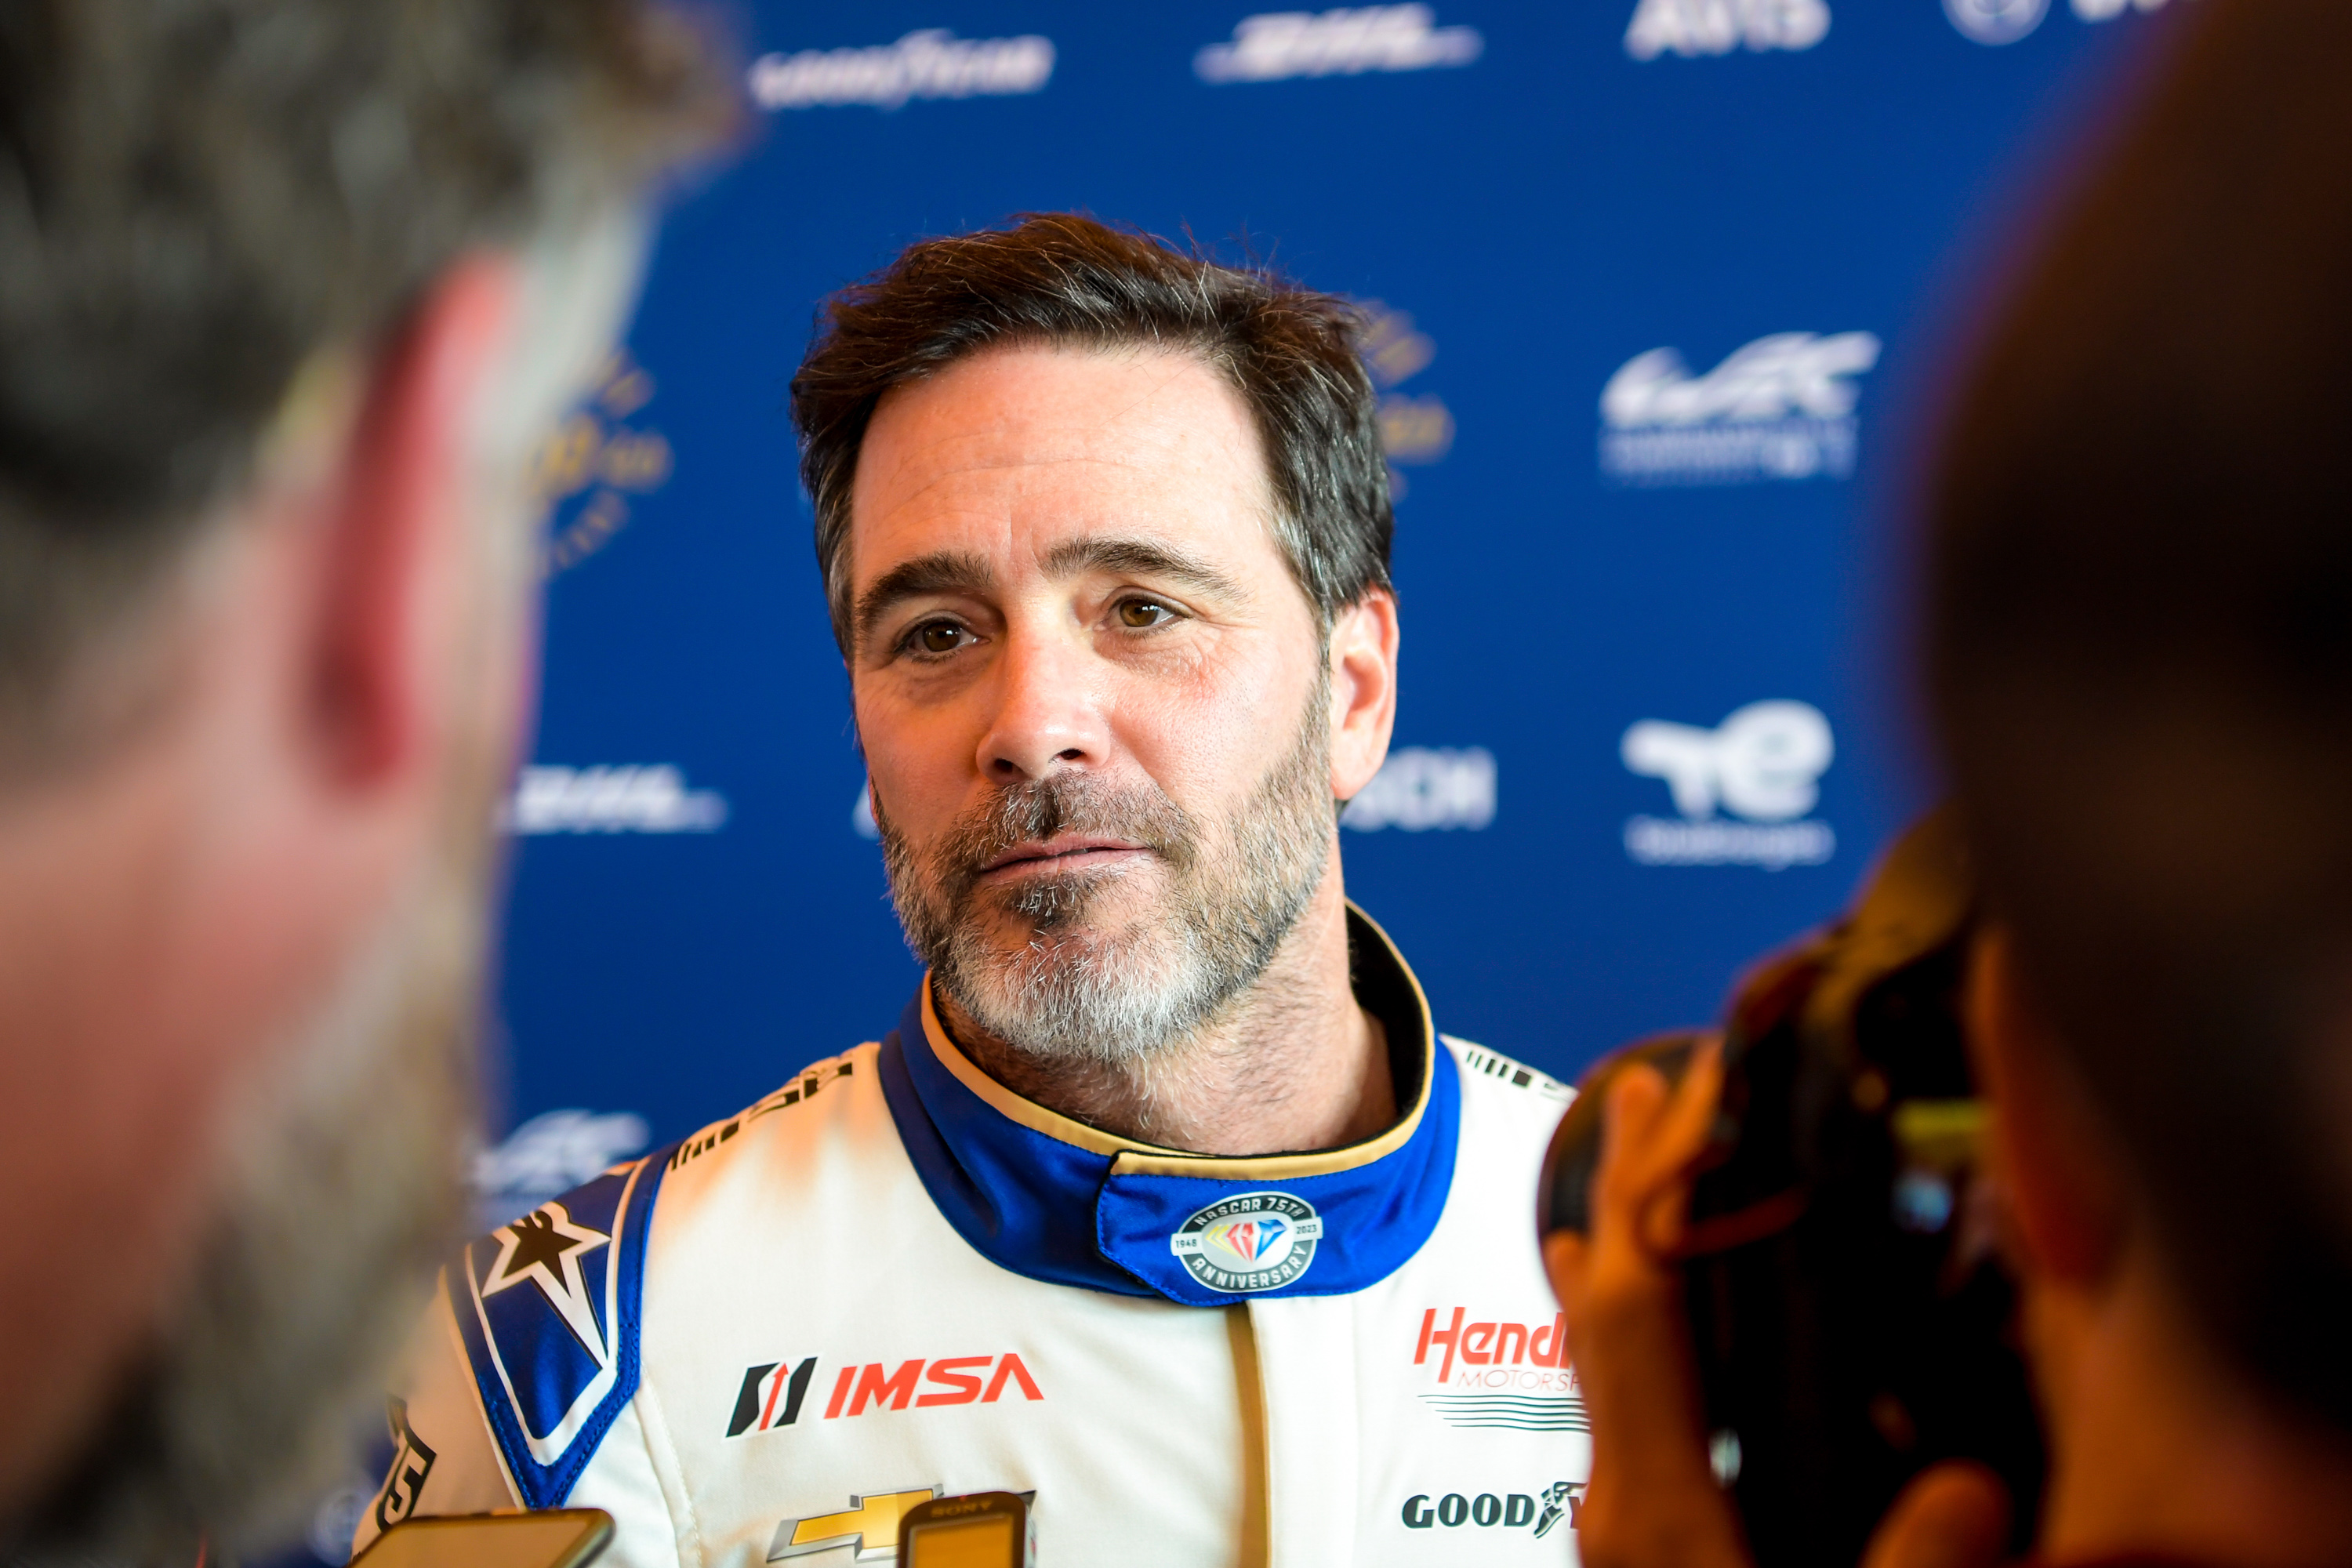 Endurance is no stranger to Jimmie Johnson as he has already raced in the Rolex 24 at Daytona nine times.